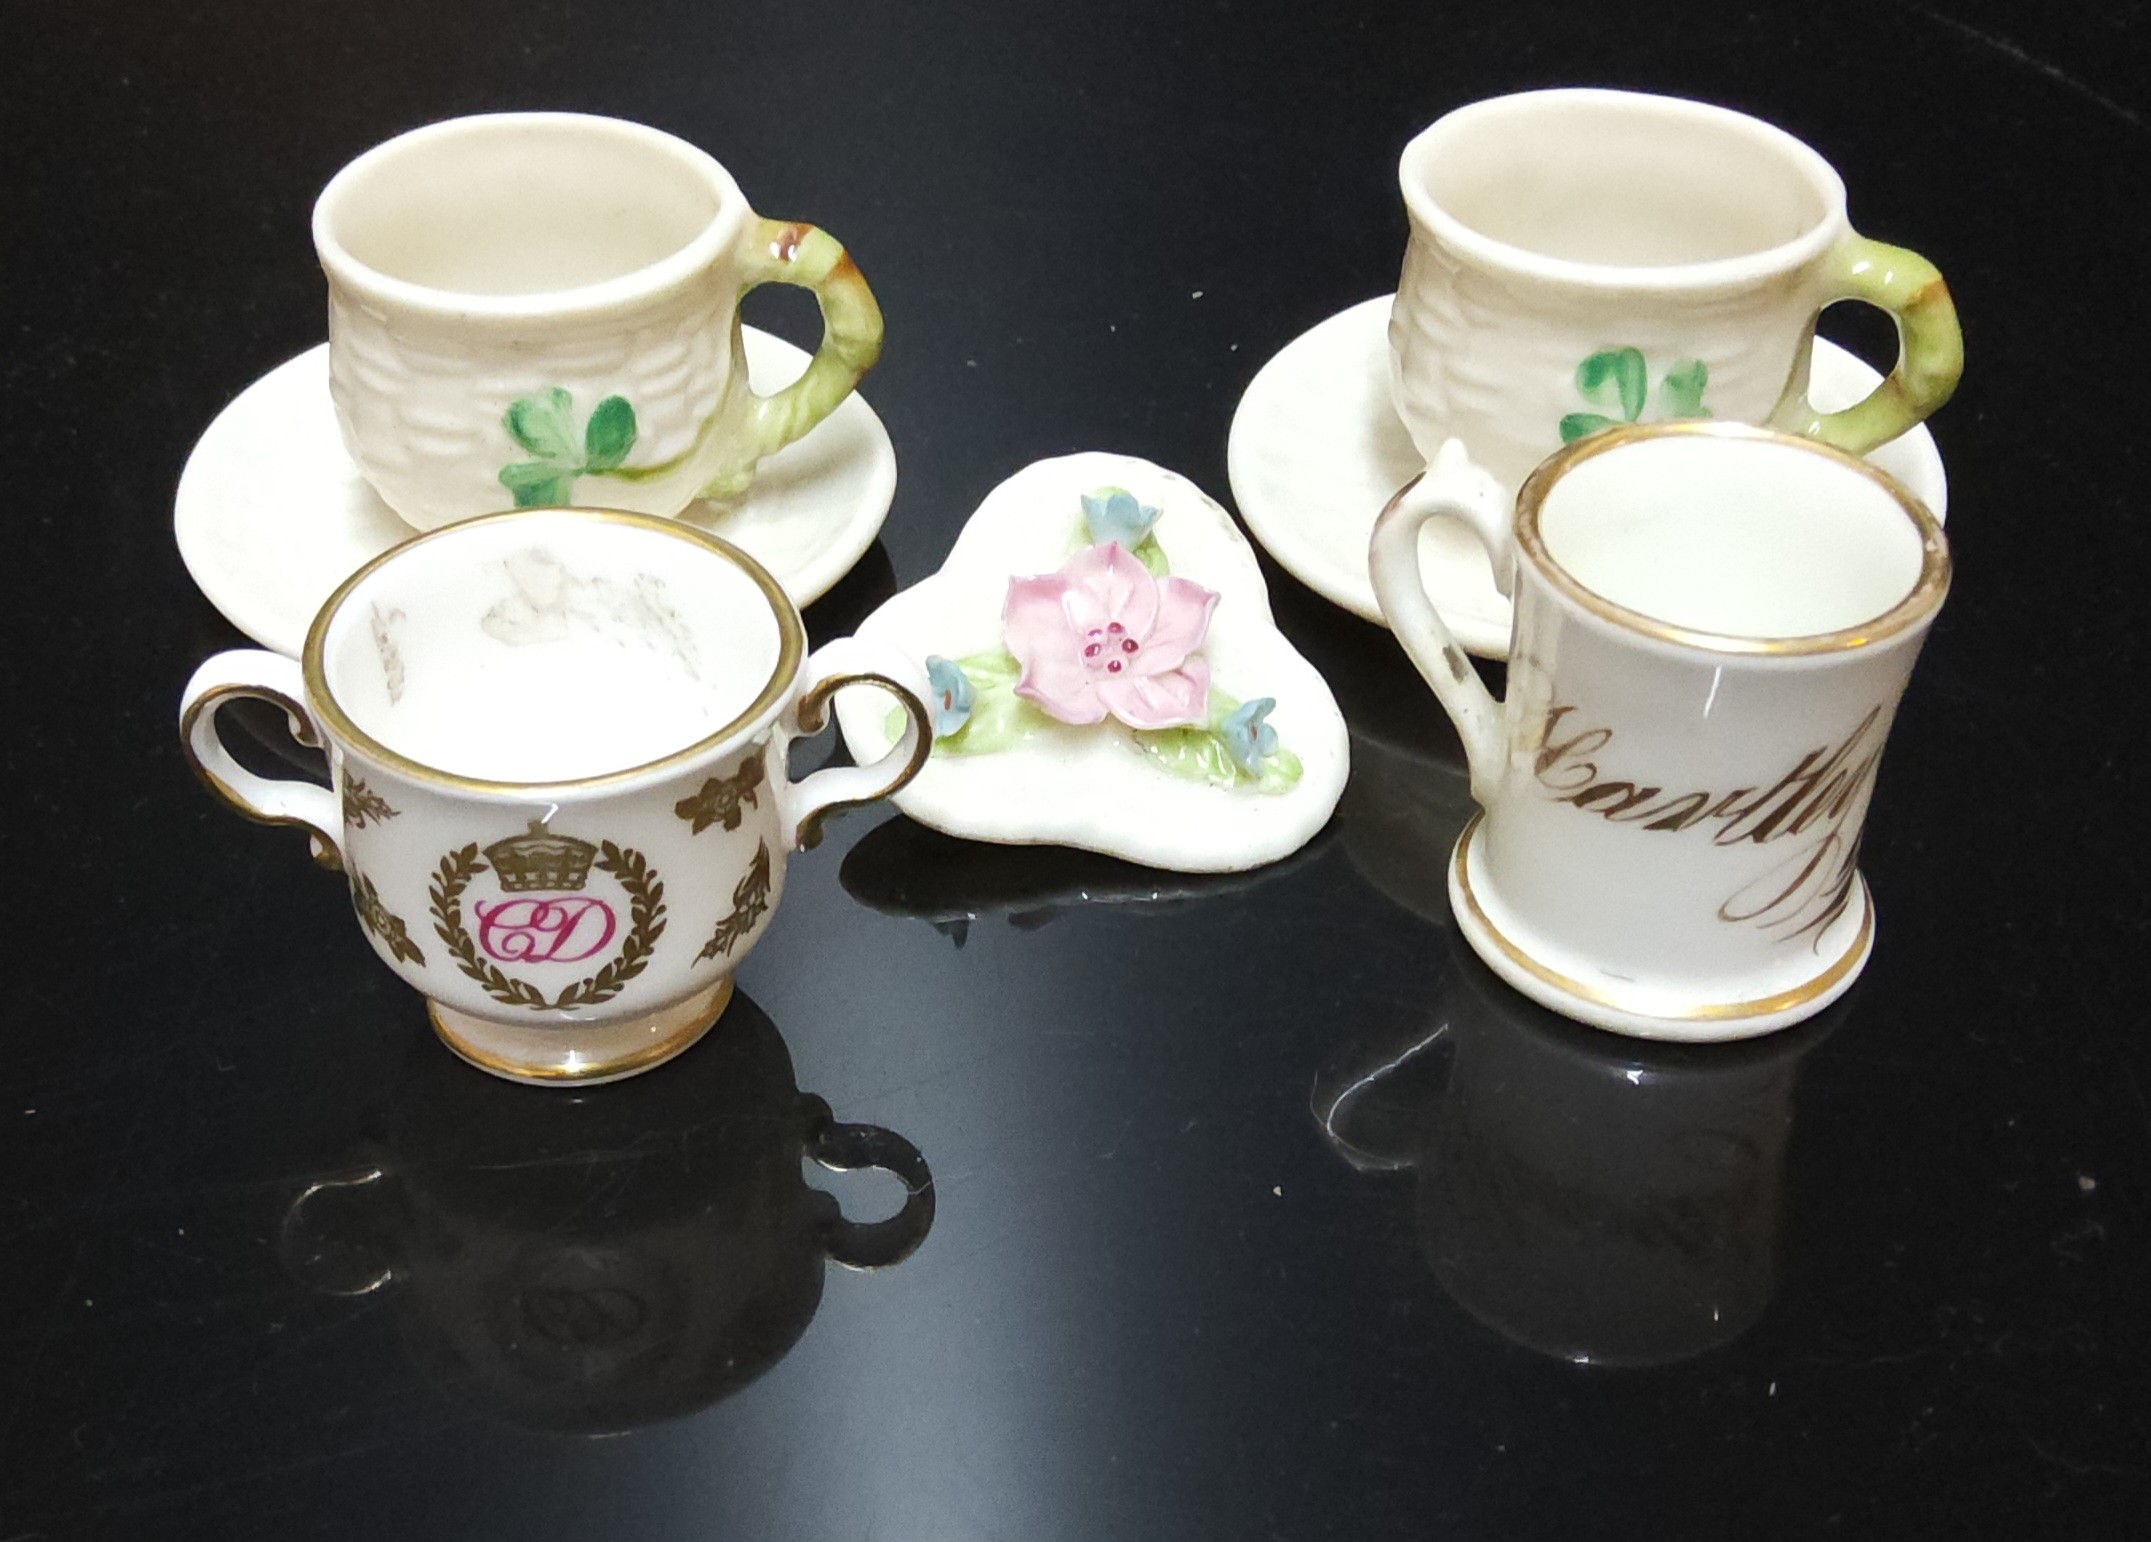 Dolls Accessories - a pair of Belleek miniature doll's house Shamrock pattern teacups and